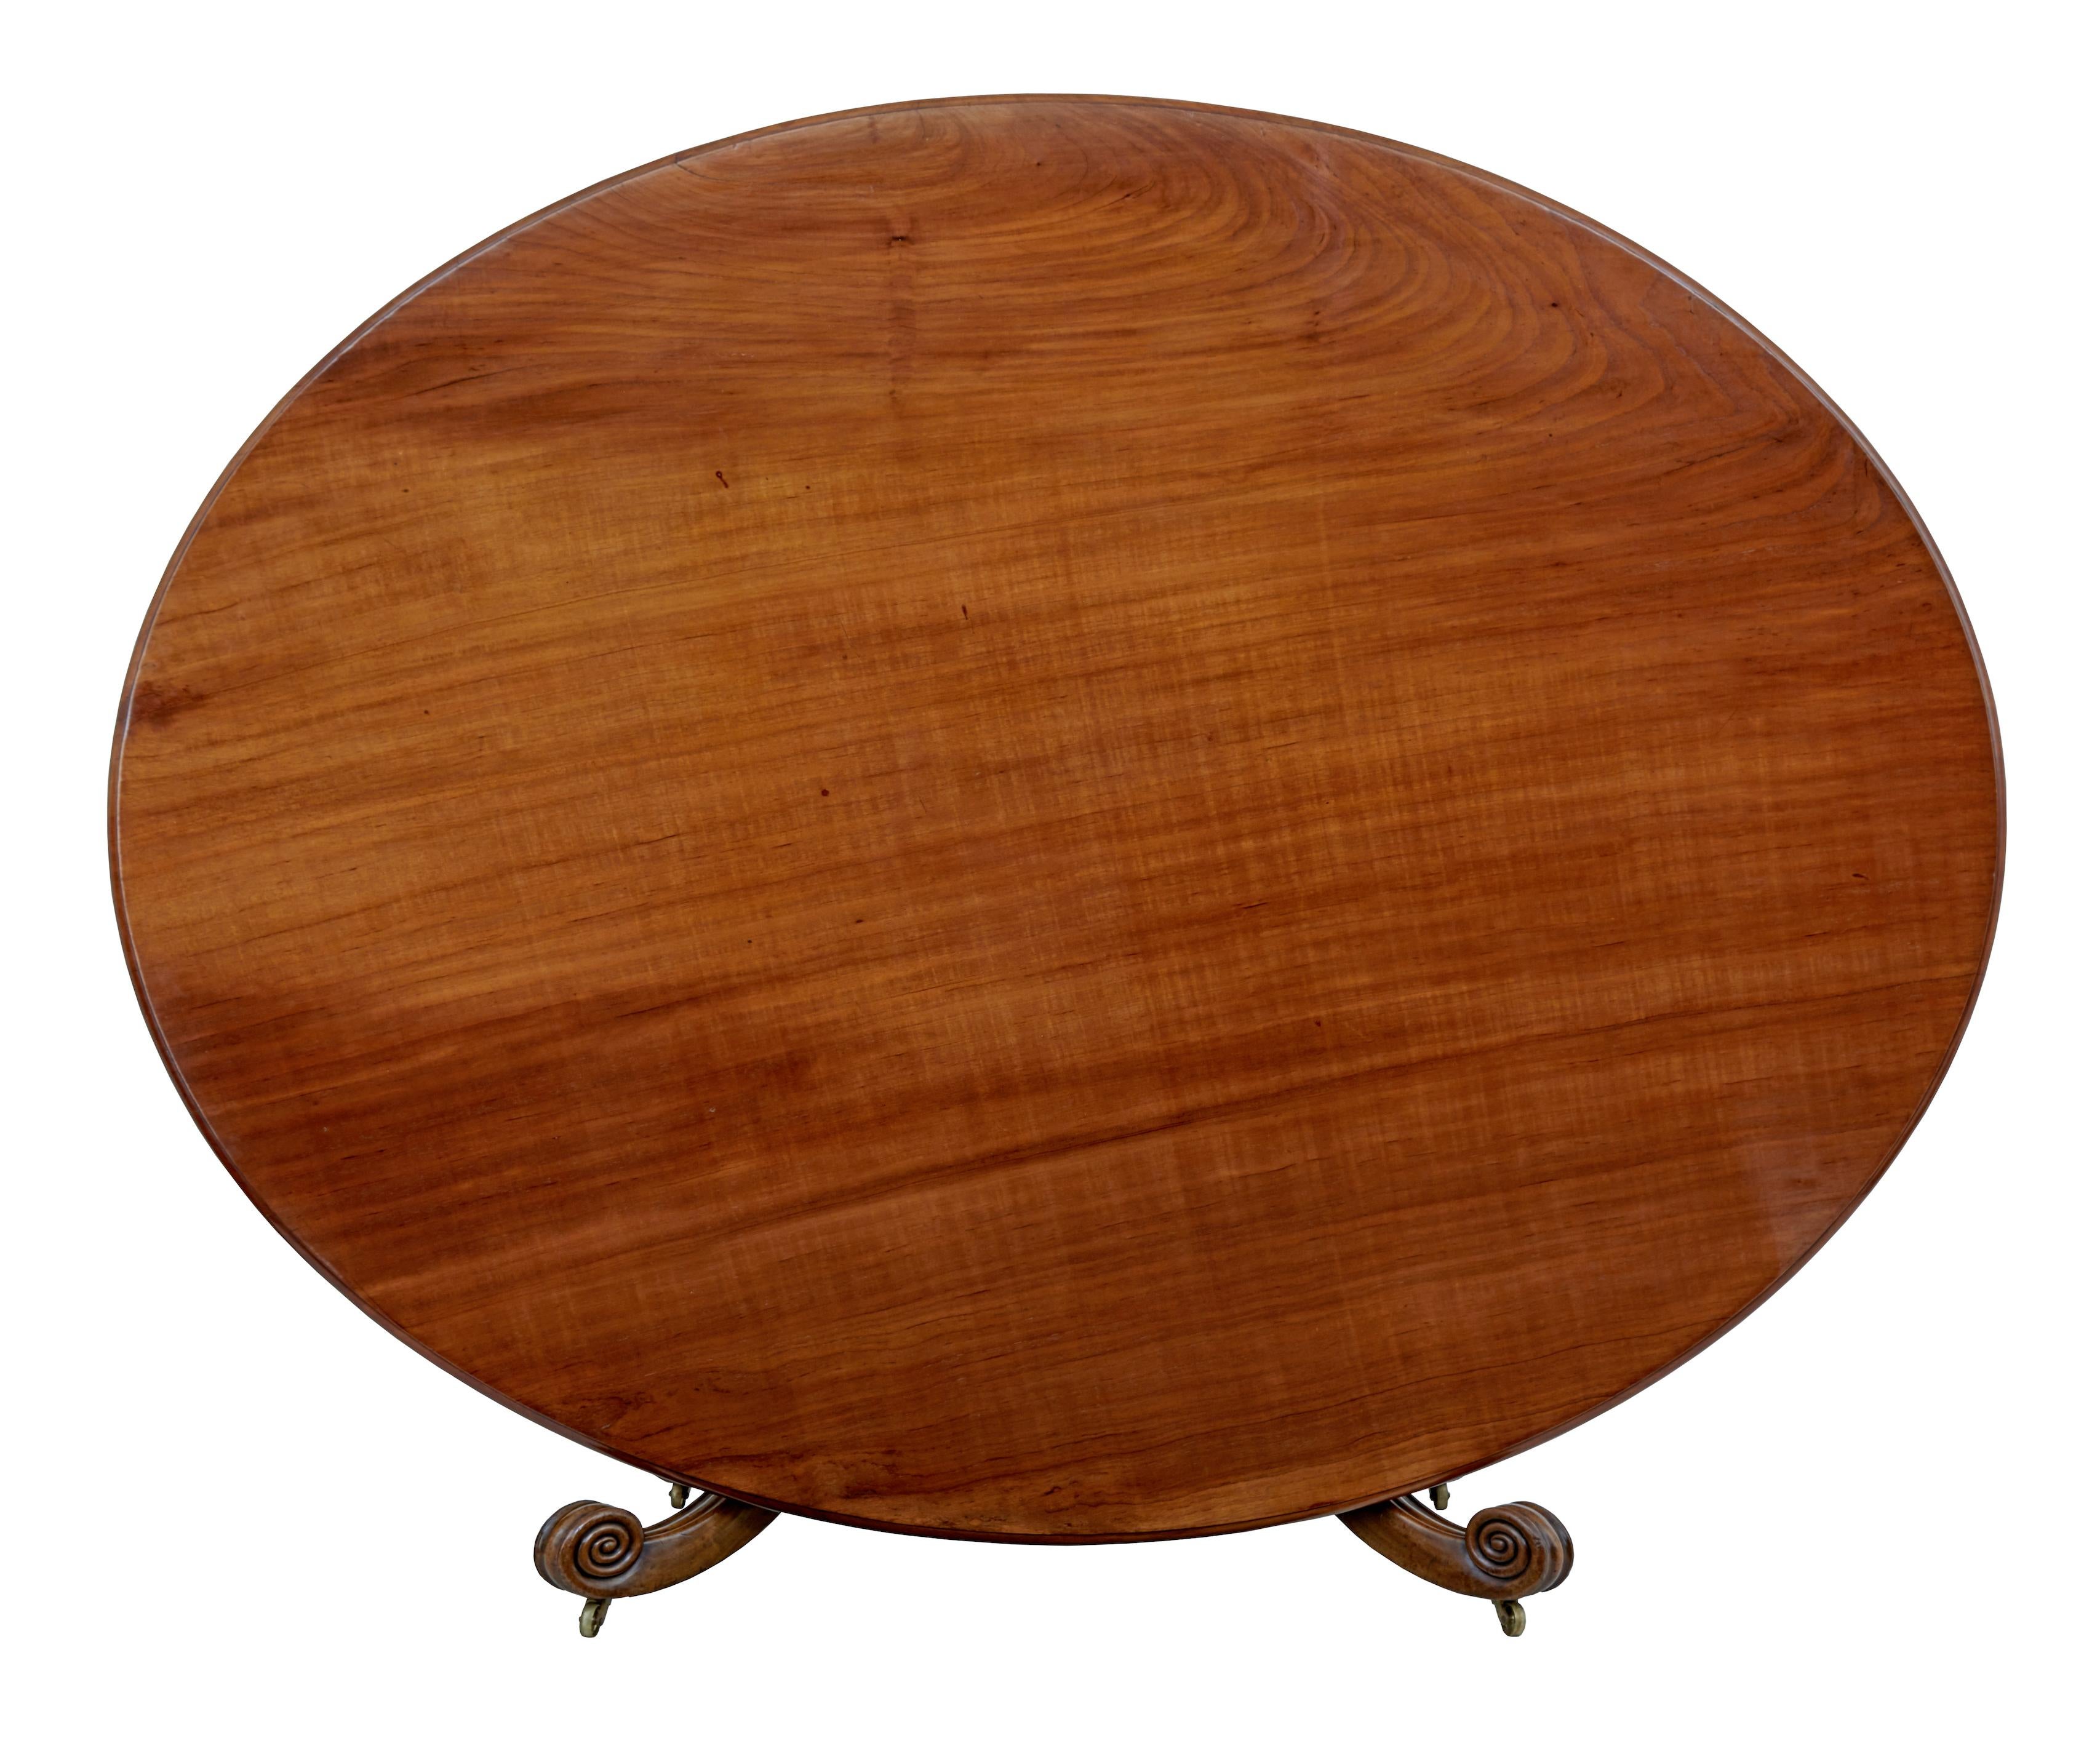 Rare George IV mahogany tilt top breakfast table of enormous proportions, circa 1830.

We are pleased to offer this extremely rare 1 piece top breakfast table. Made with a slight elipsed shape which has allowed the top to be used without creating